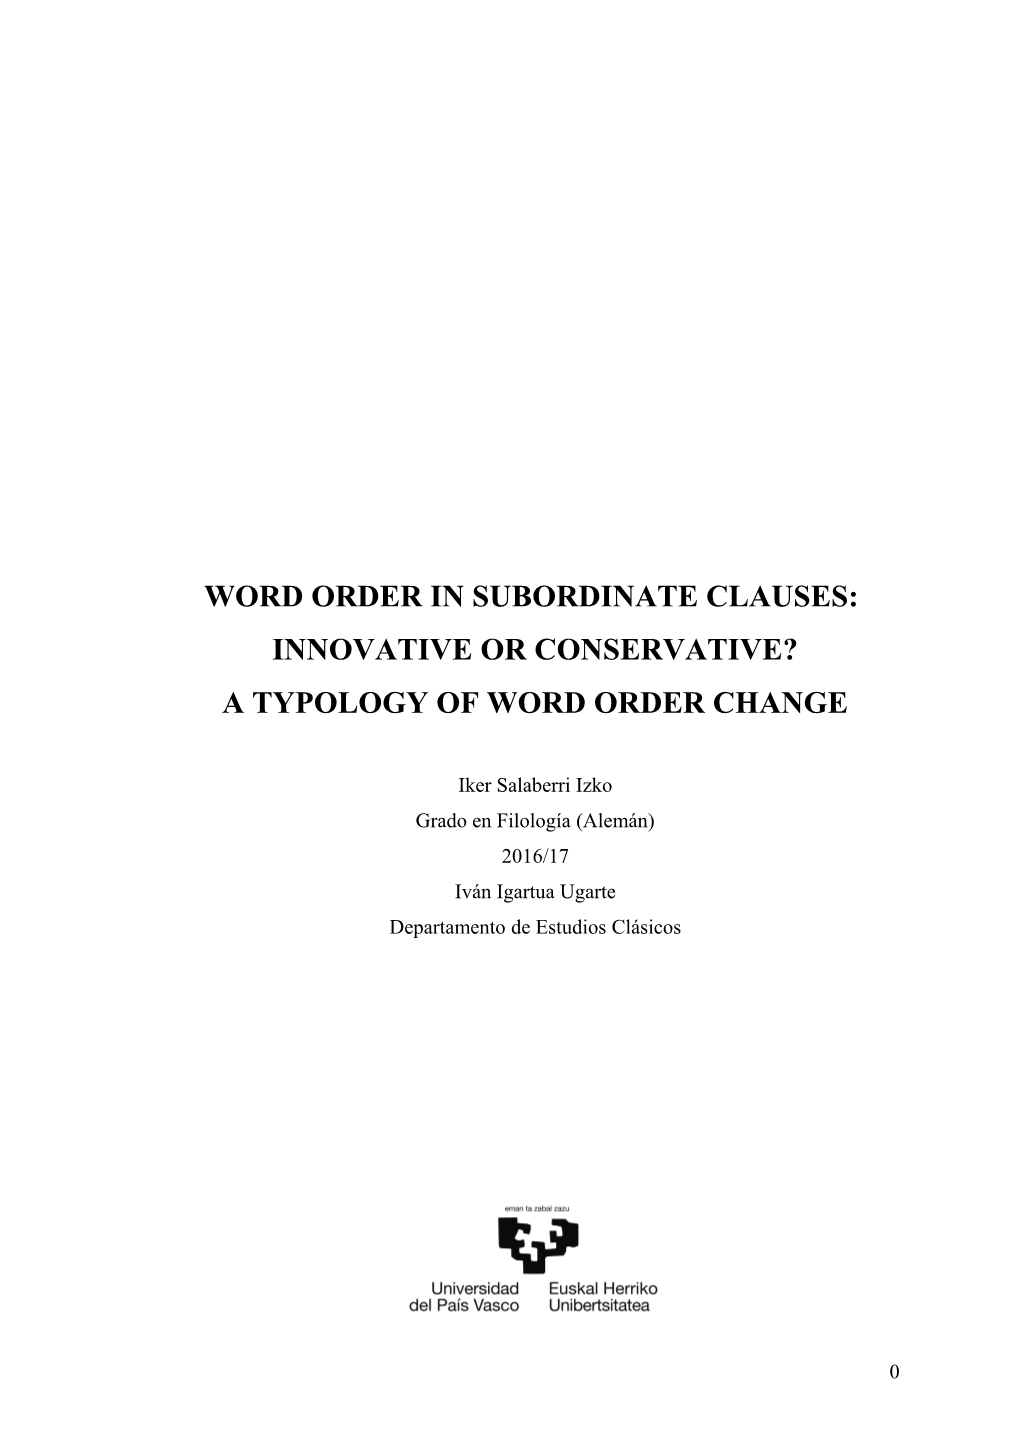 Word Order in Subordinate Clauses: Innovative Or Conservative? a Typology of Word Order Change